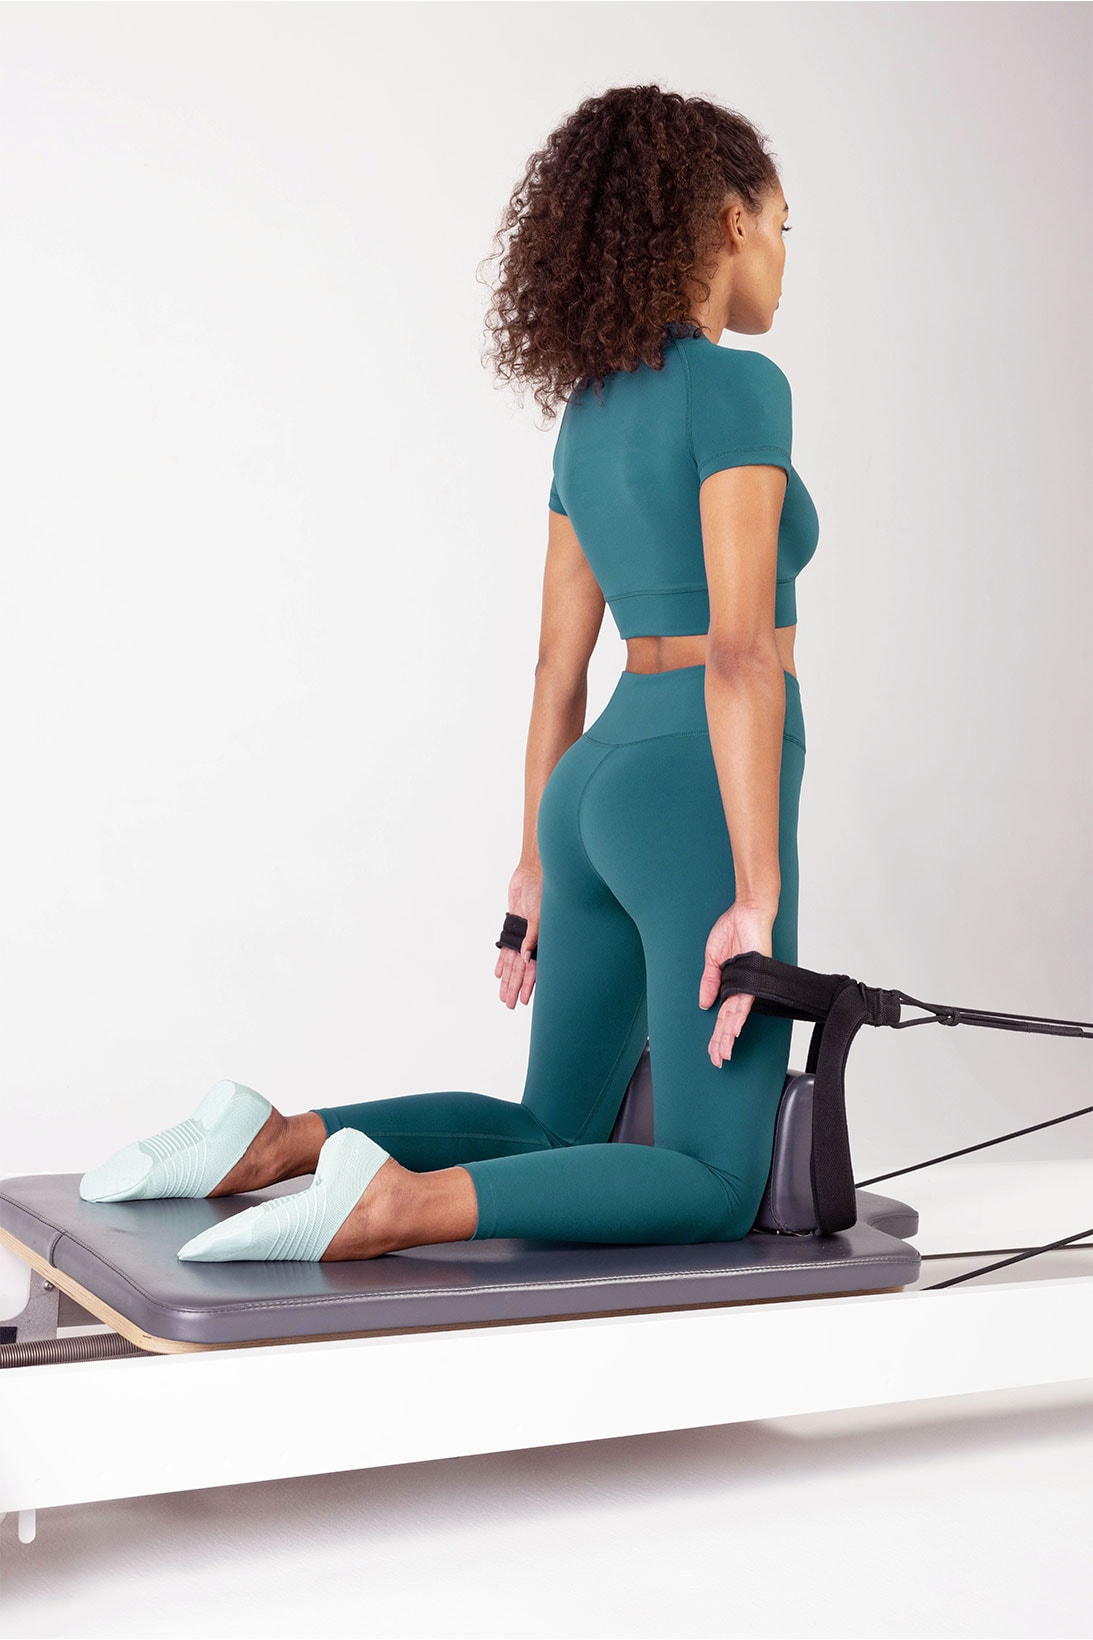 Bloch to Launch Activewear, Studio Shoe for Pilates and Yoga - Yahoo Sports